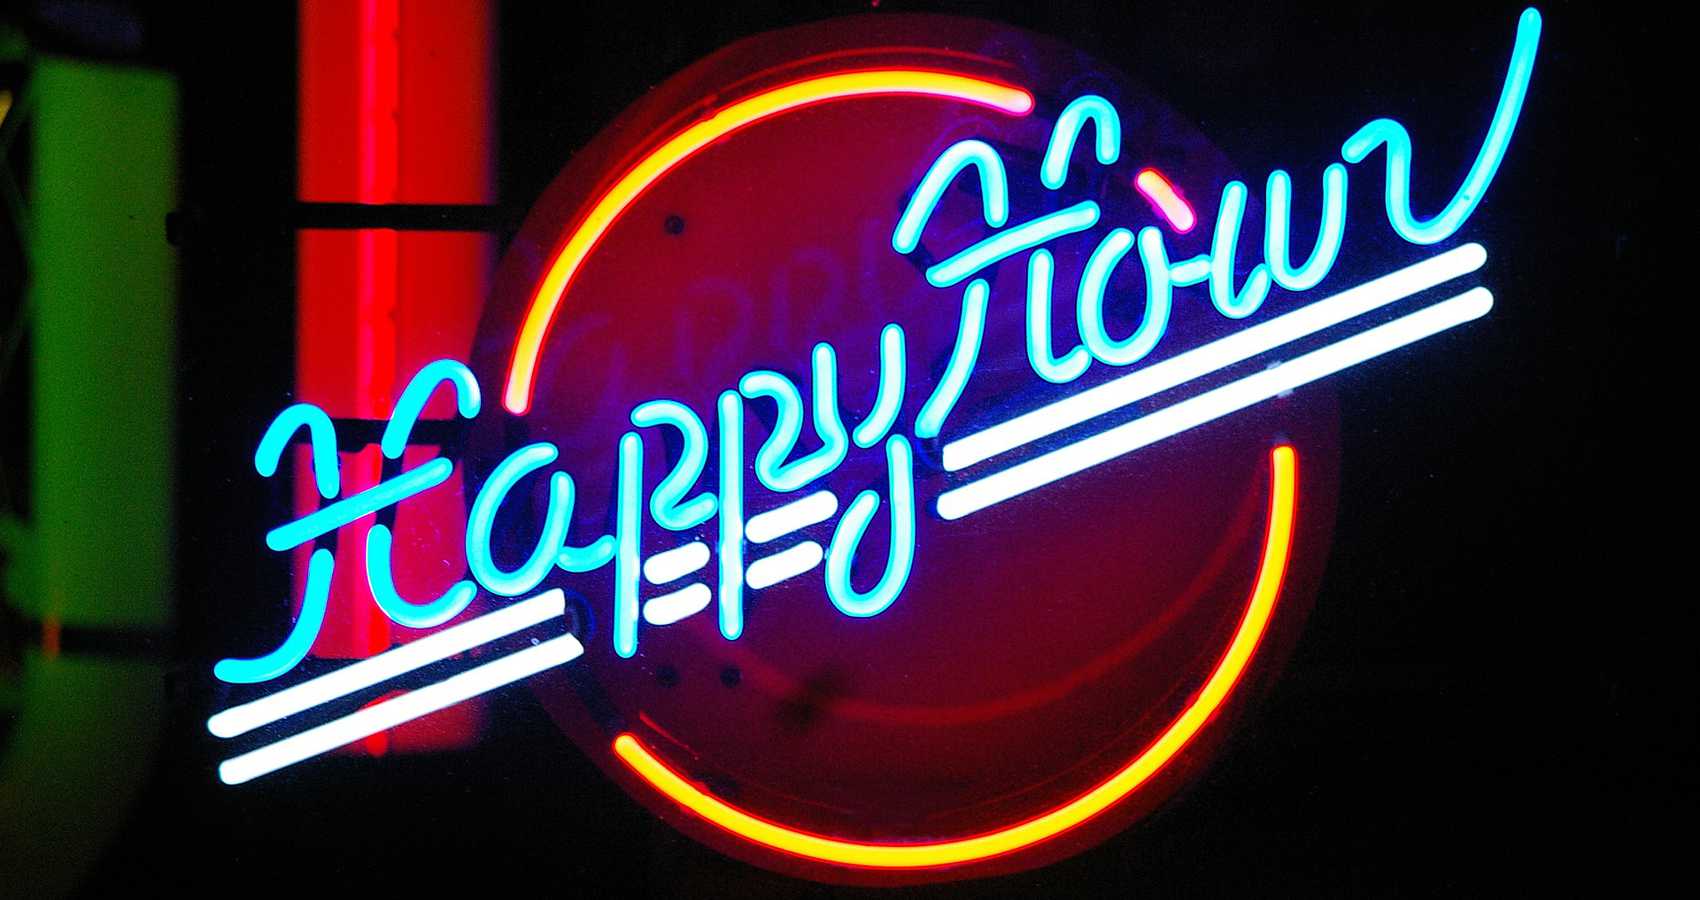 Happy Hour, a short story by George C Glasser at Spillwords.com